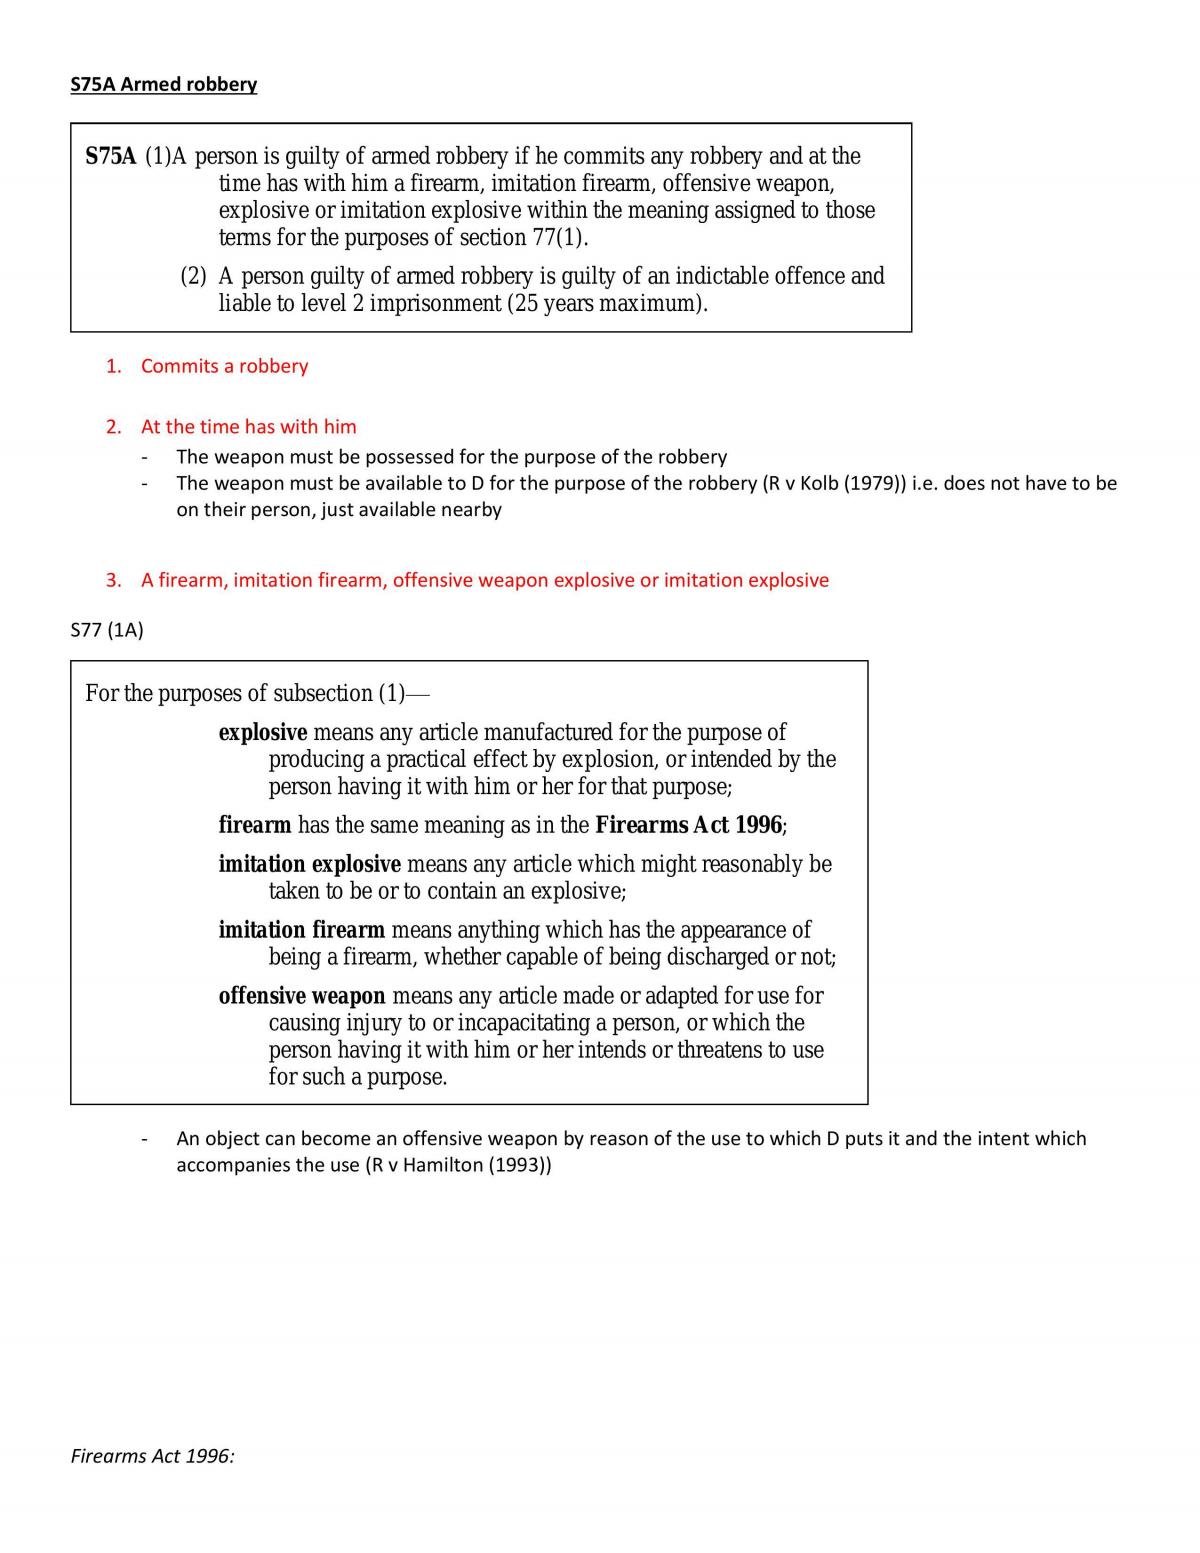 MLL214 Study Notes - Page 12